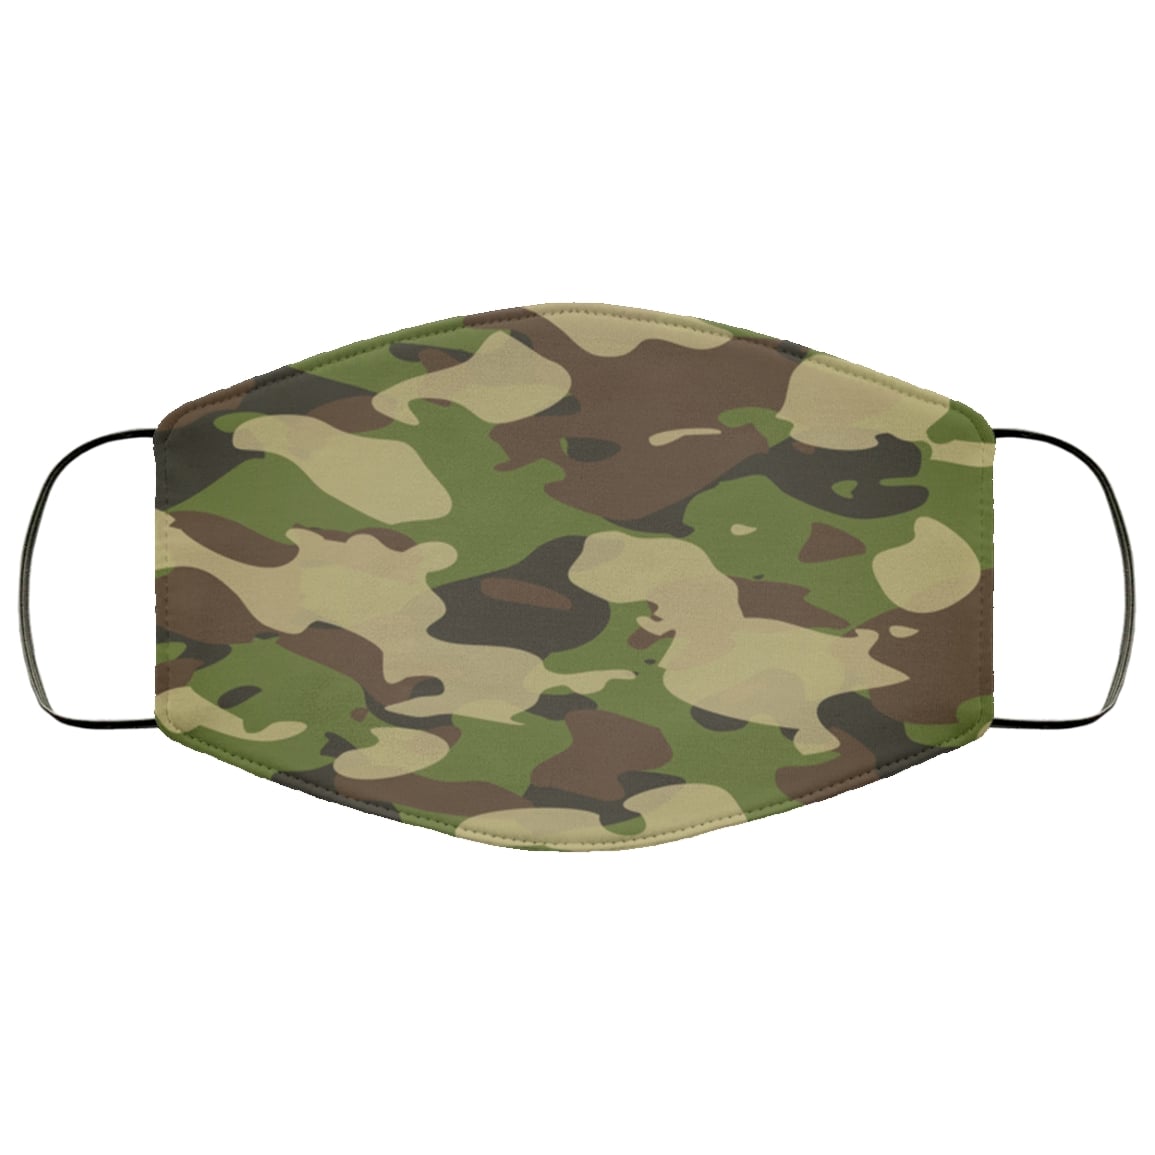 Camouflage army military anti pollution face mask - maria